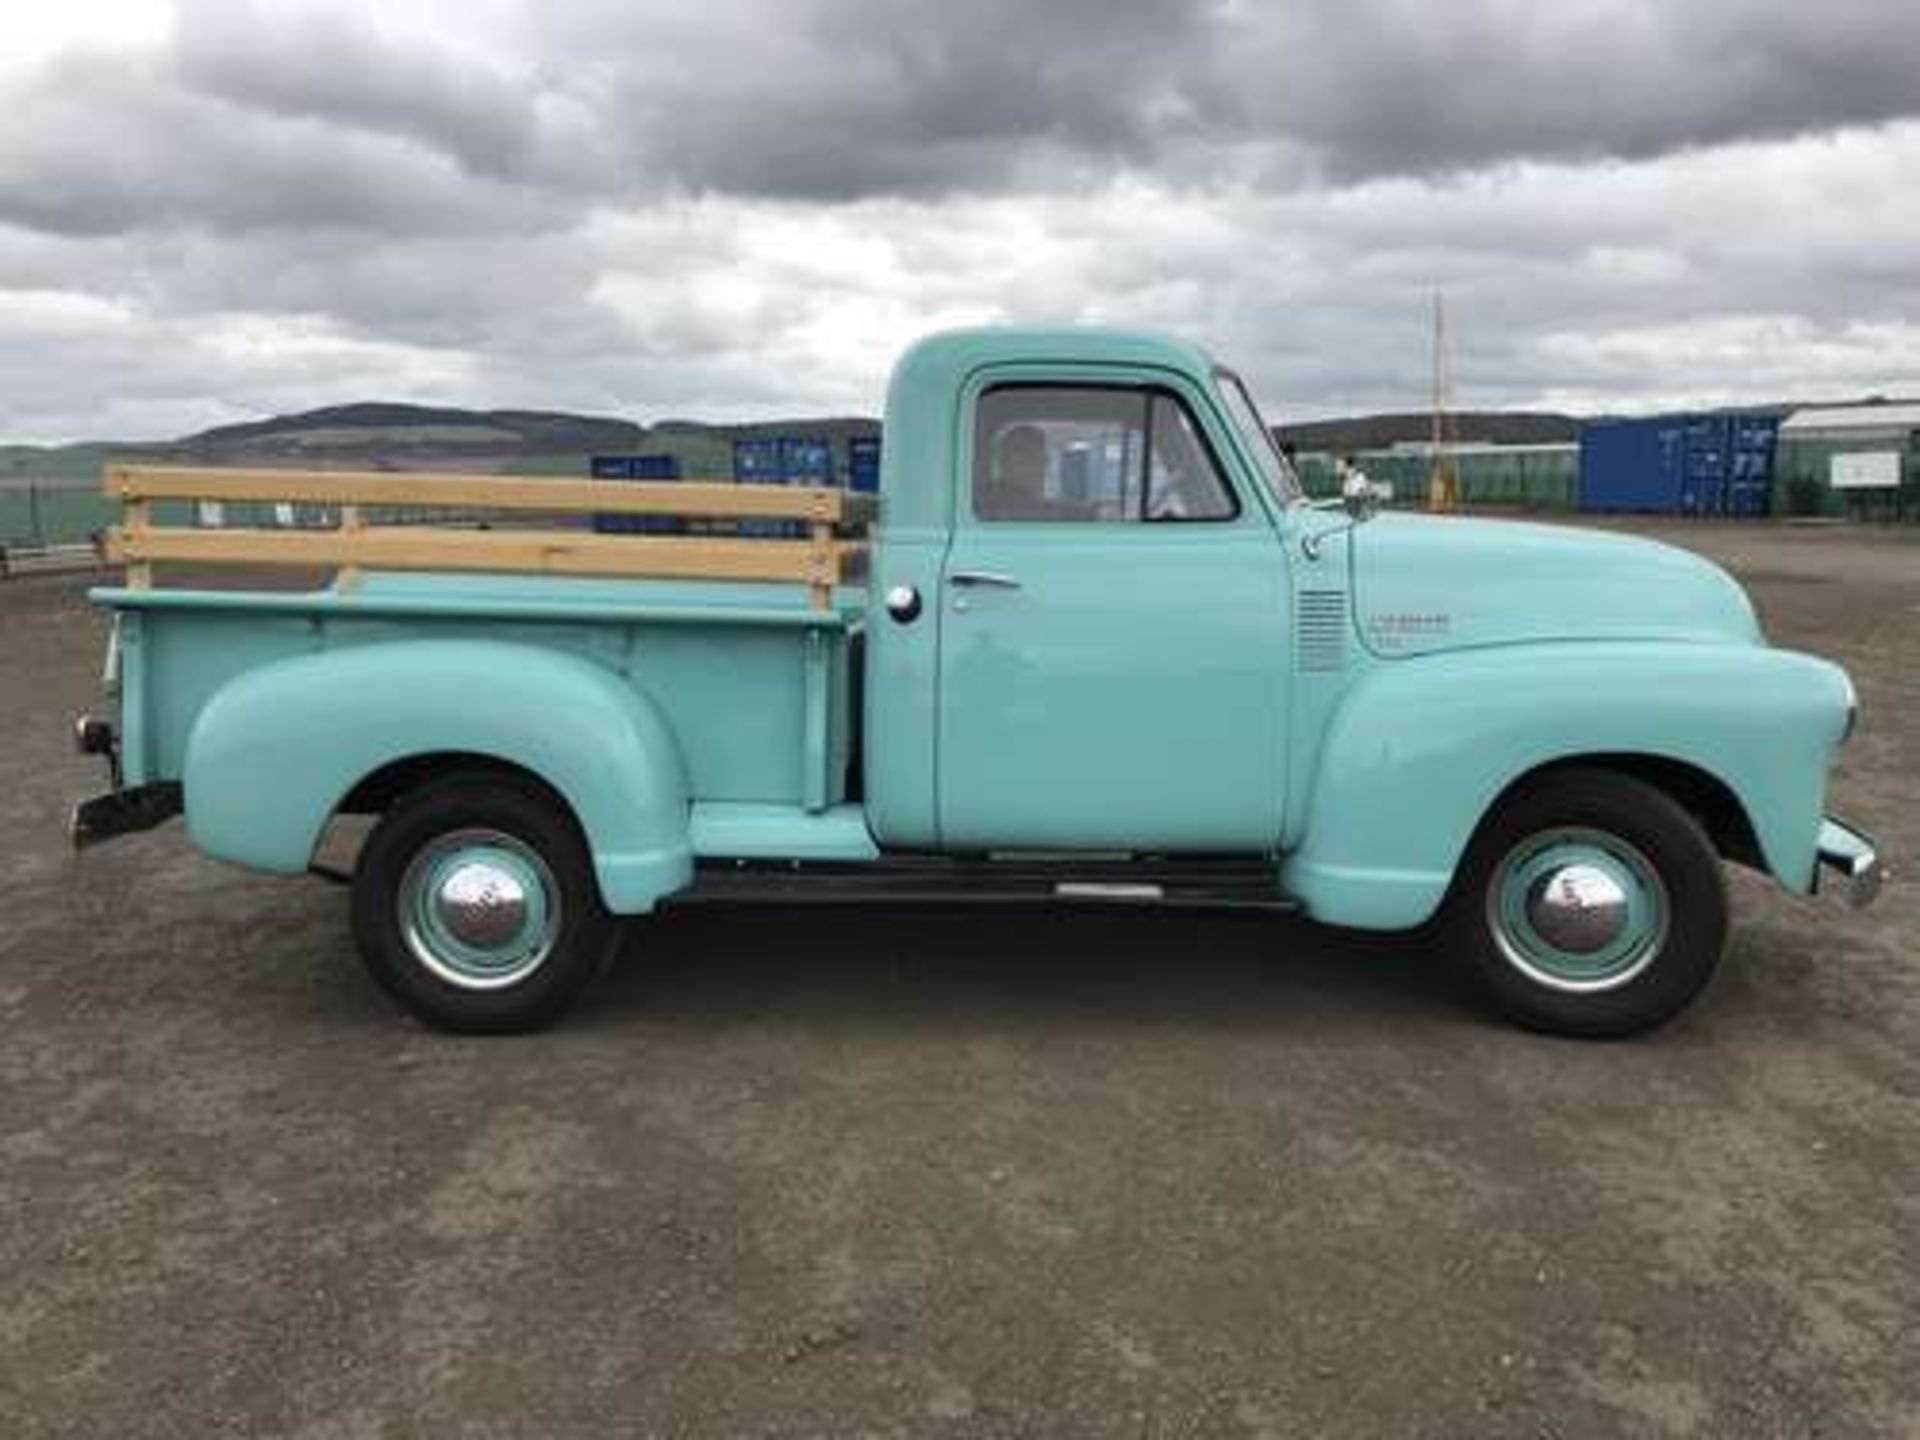 CHEVROLET 3100 PICK UP - 3500cc - Image 10 of 16